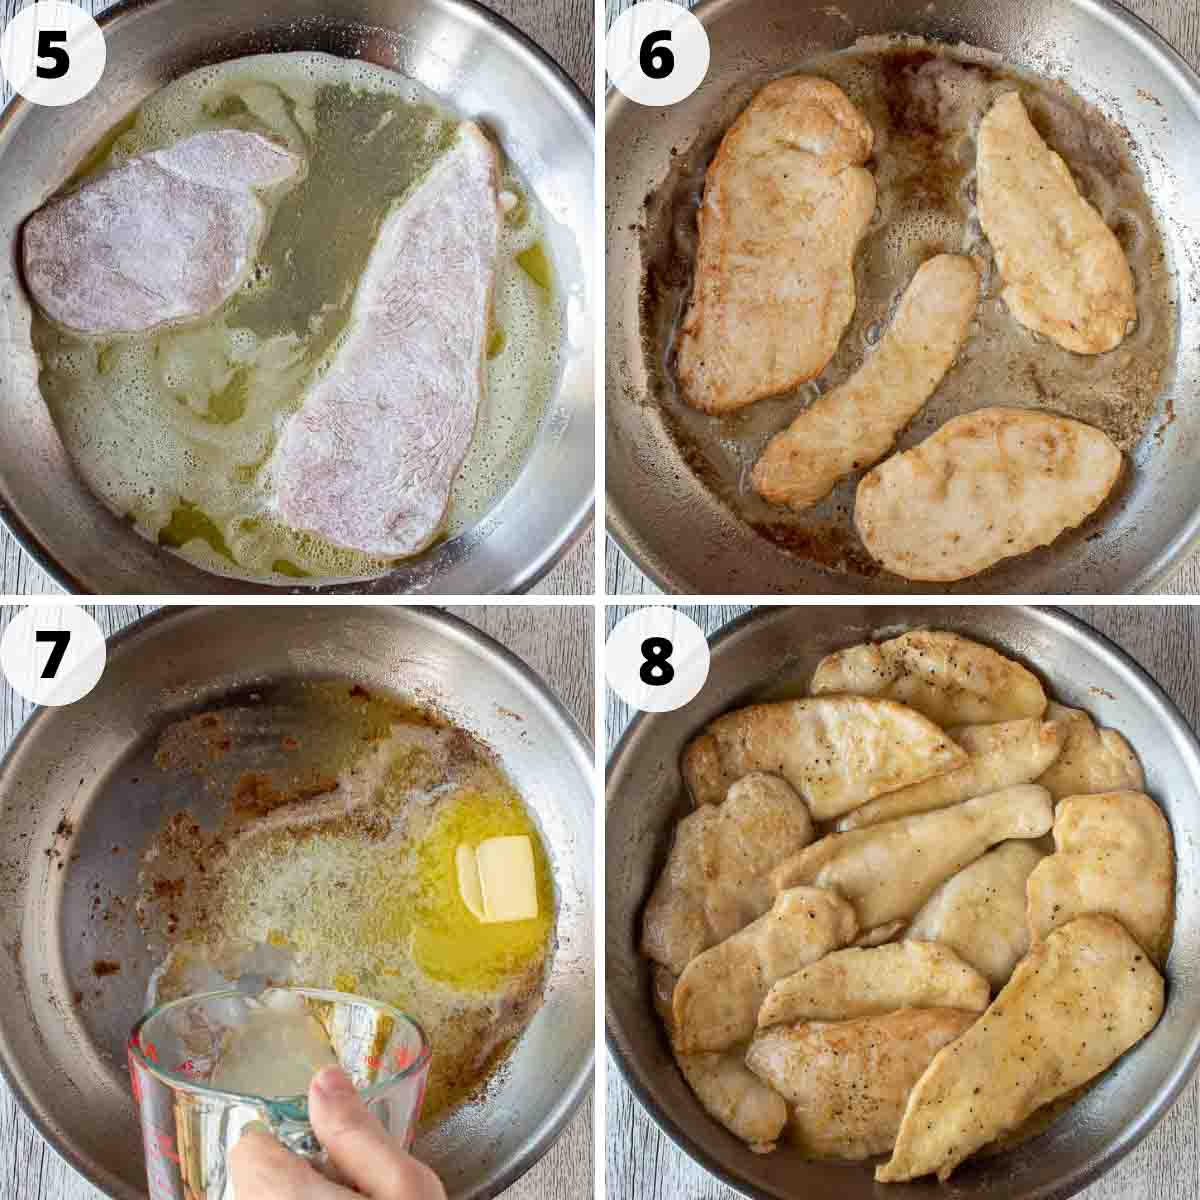 The final four steps to finishing this chicken dish.